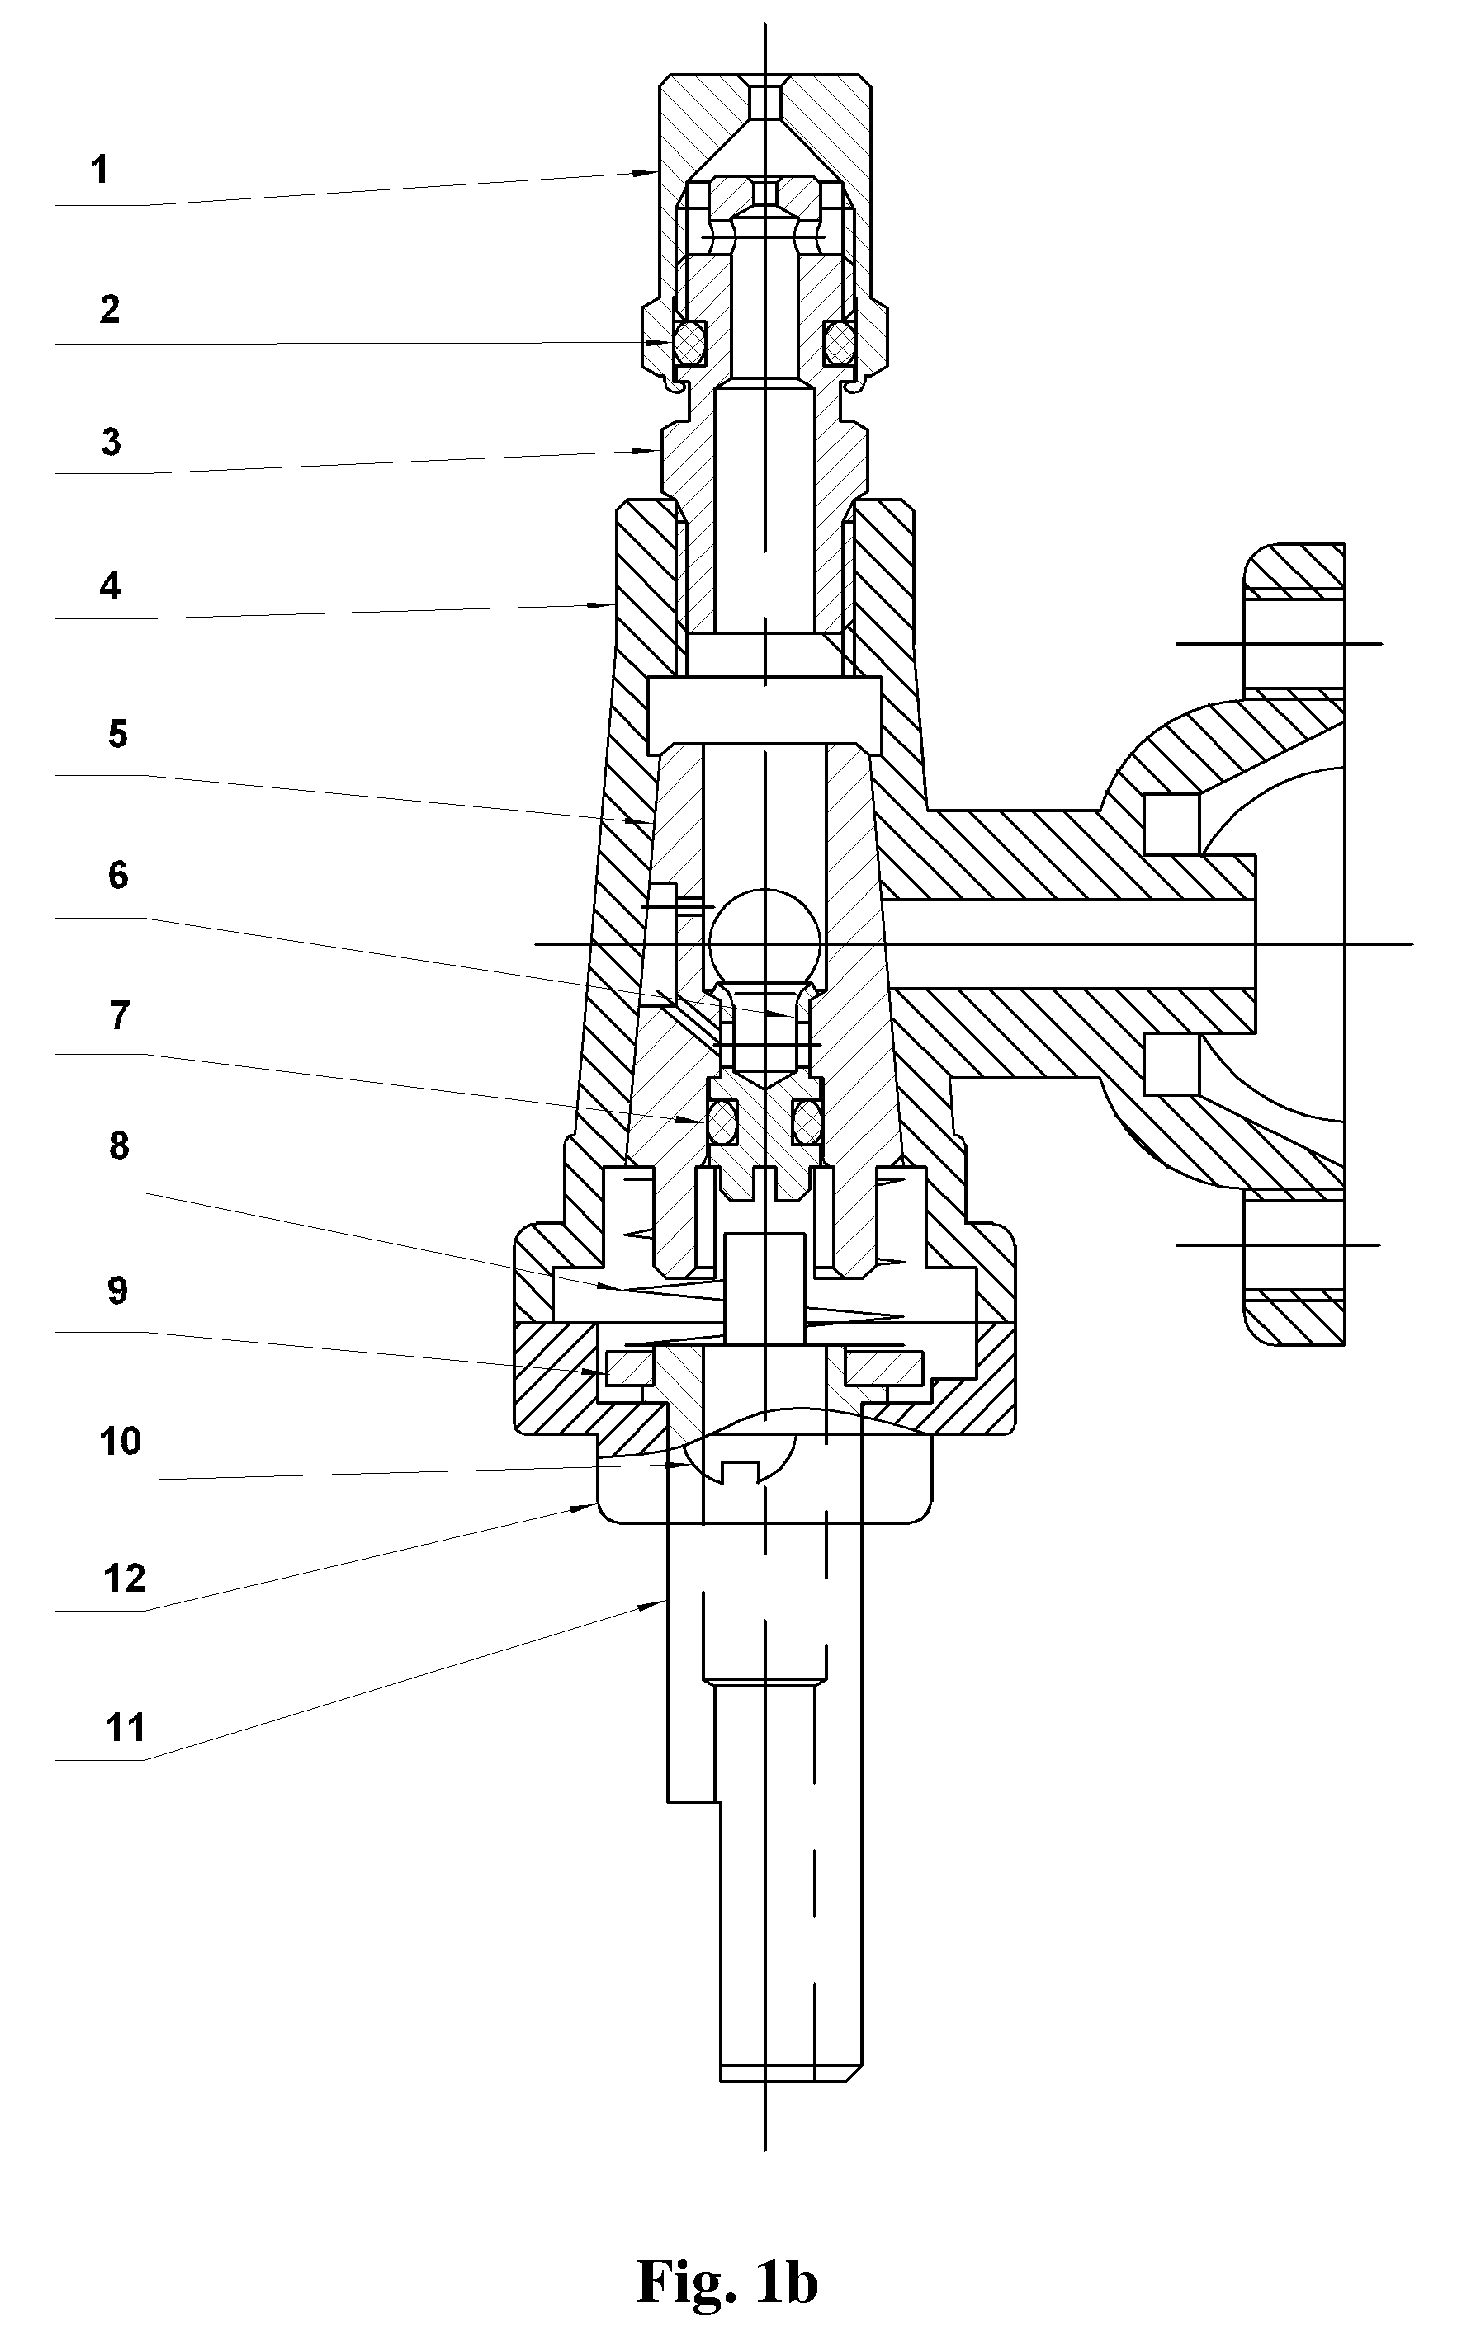 Manual gas valve with natural/LP gas conversion capability